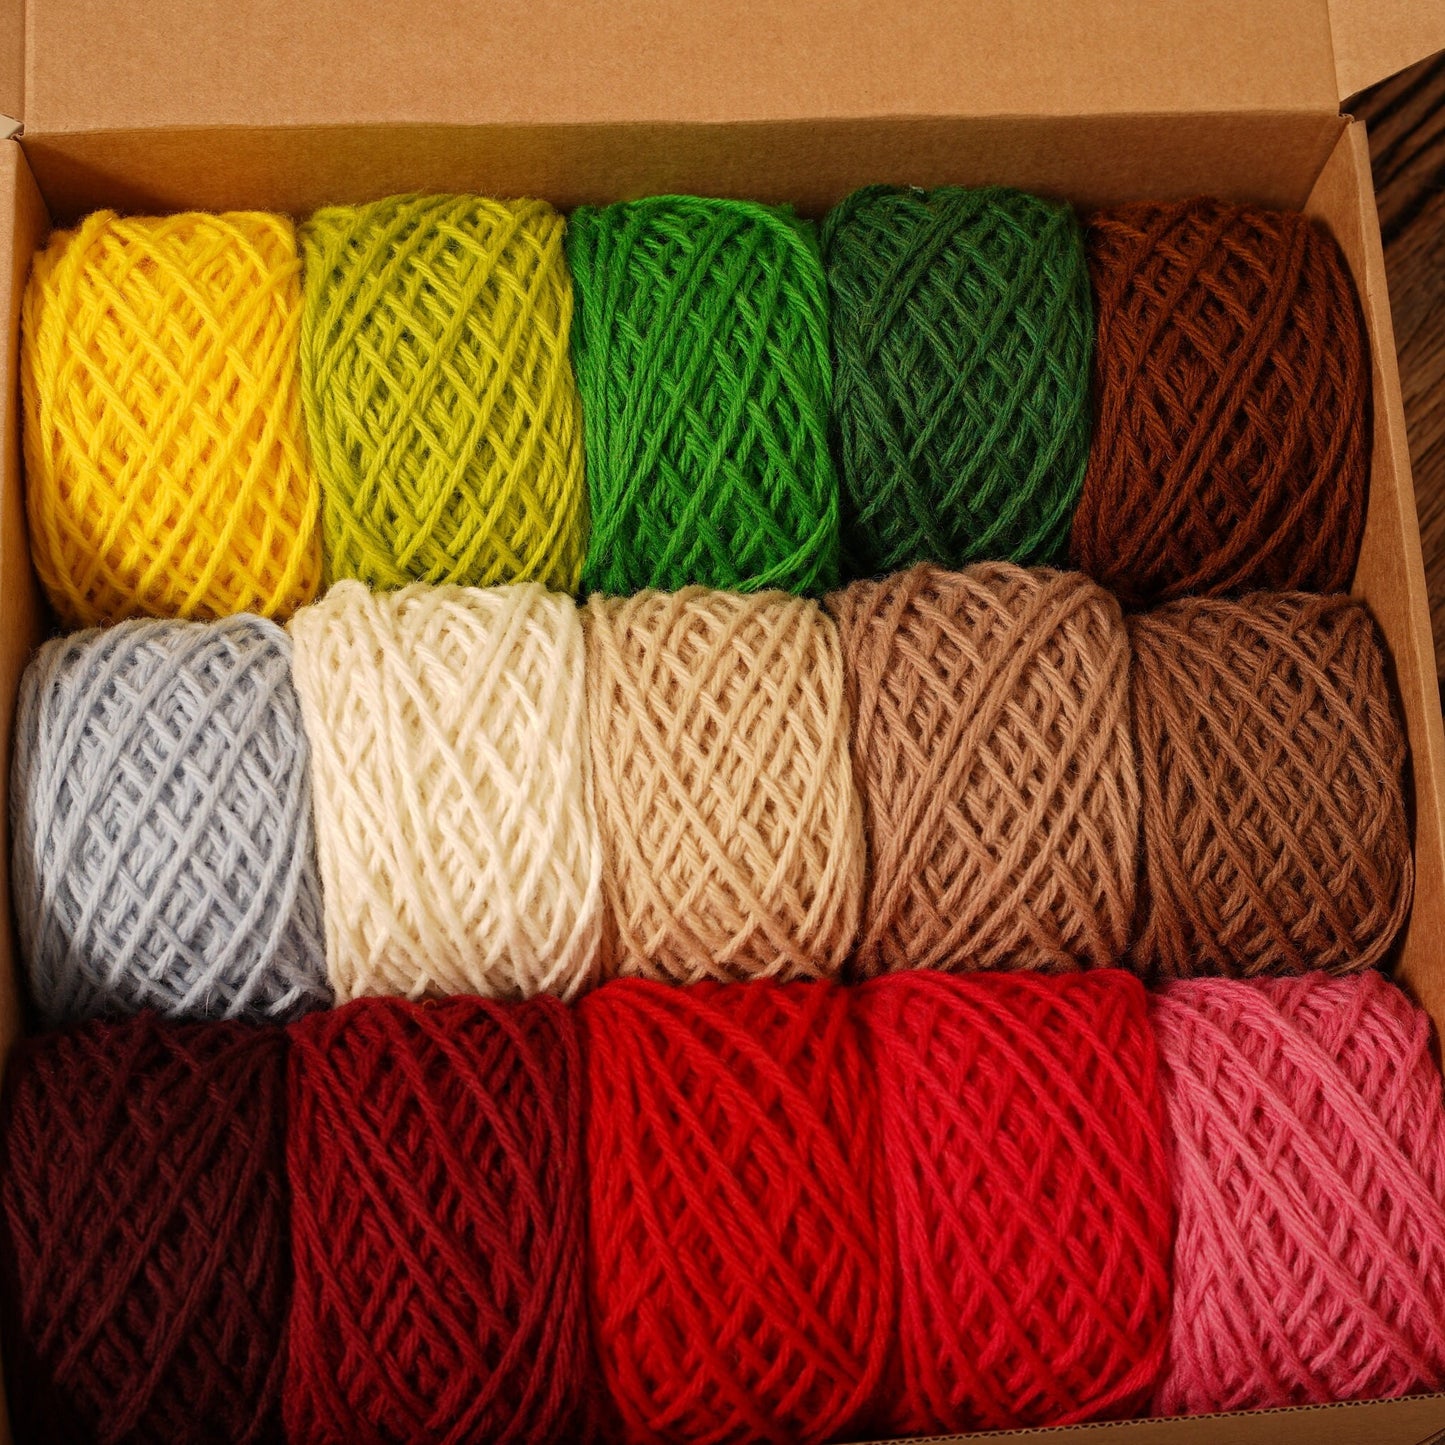 15 colours of wool yarn in a gift box | 15-colours-of-wool-yarn-in-a-gift-box